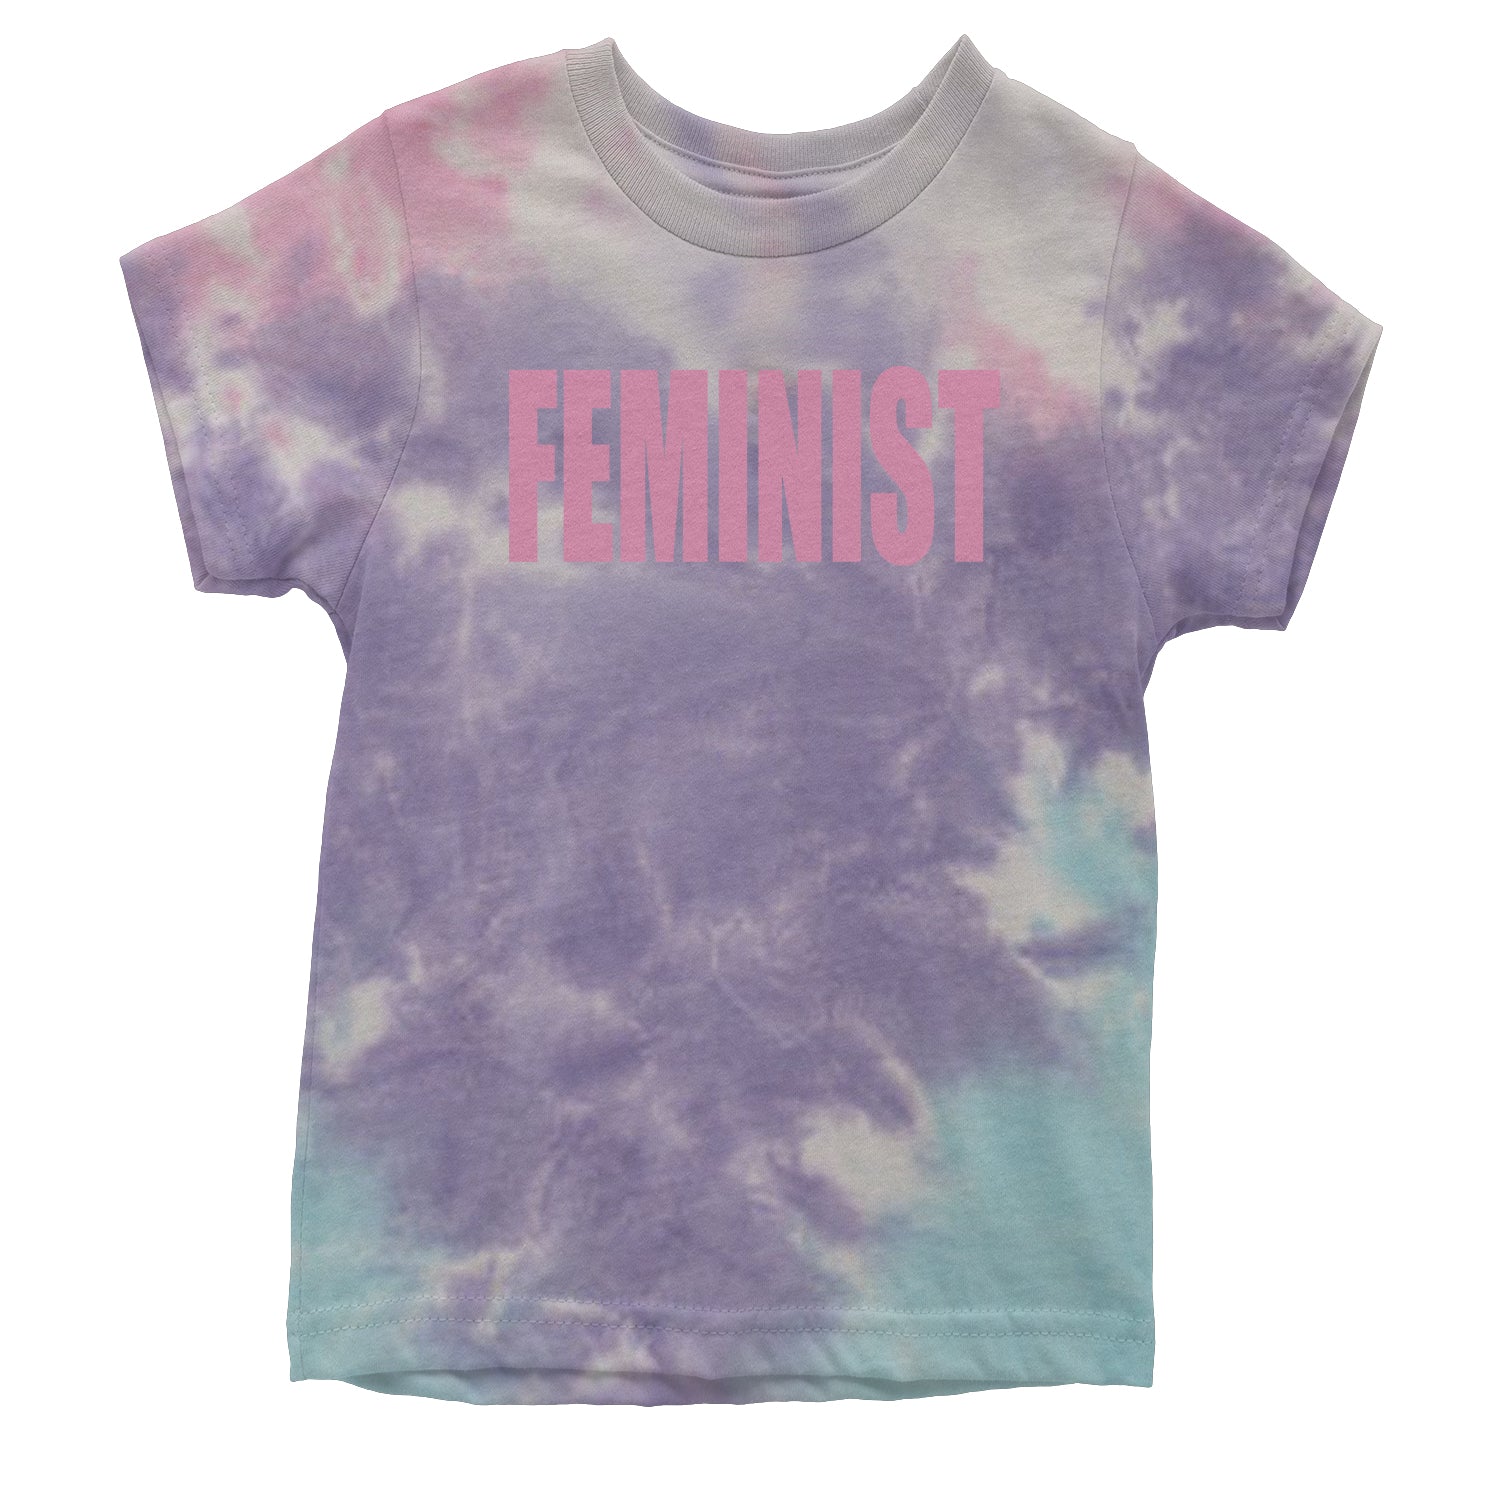 Feminist (Pink Print) Youth T-shirt a, equal, equality, feminism, feminist, gender, is, lgbtq, like, looks, nevertheless, pay, persisted, rights, she, this, what by Expression Tees